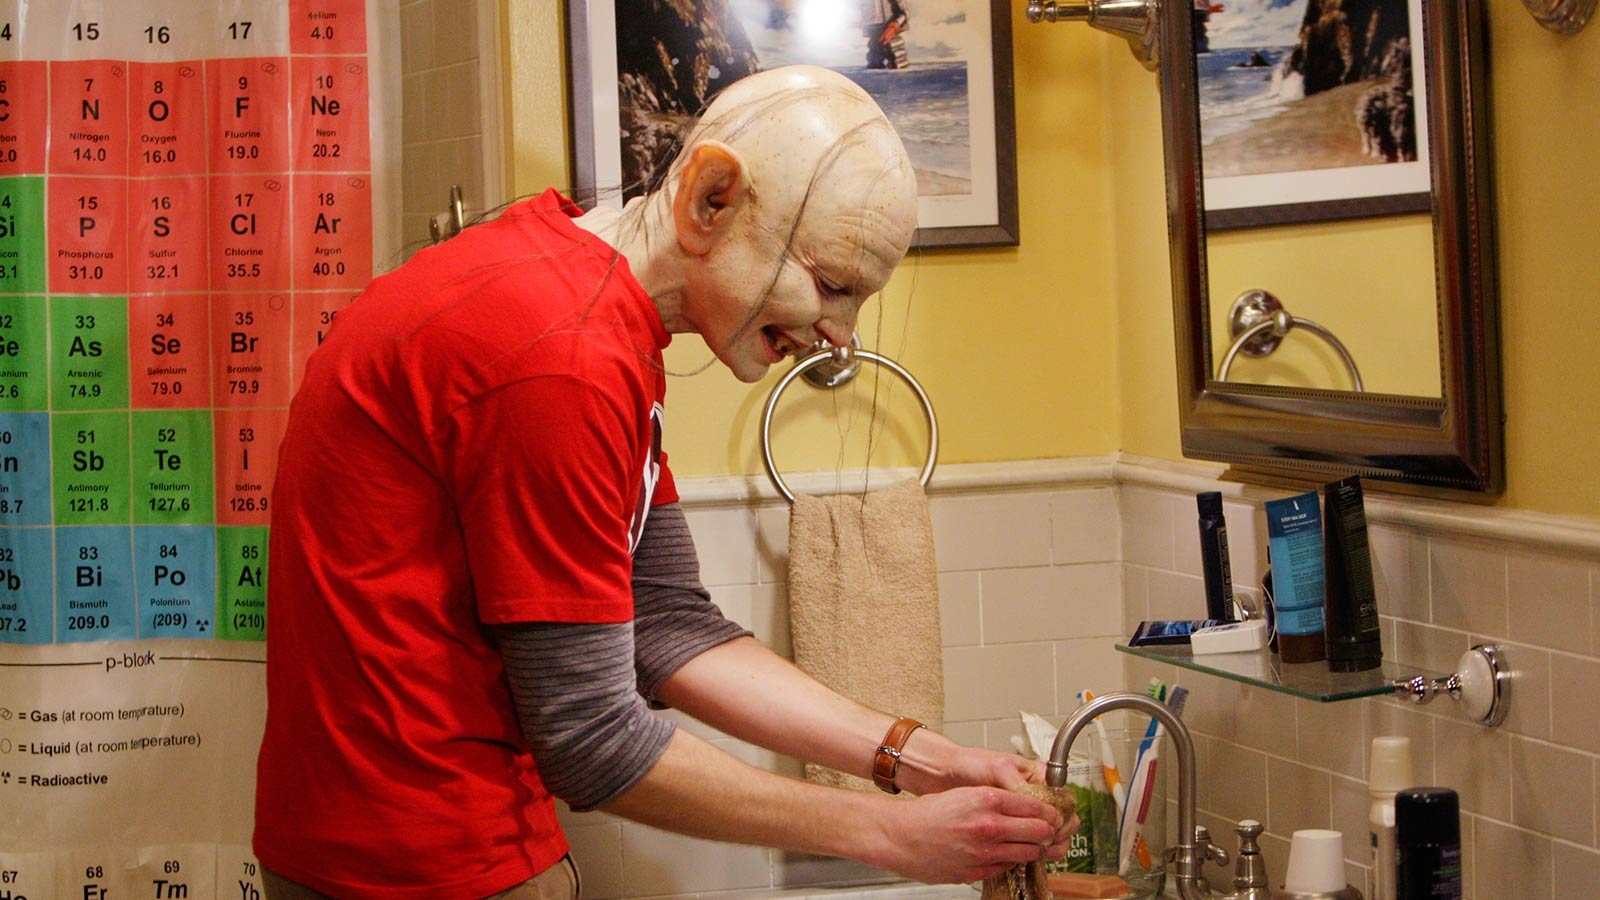 Sheldon as Gollum washing a ring on a sink in The Big Bang Theory.